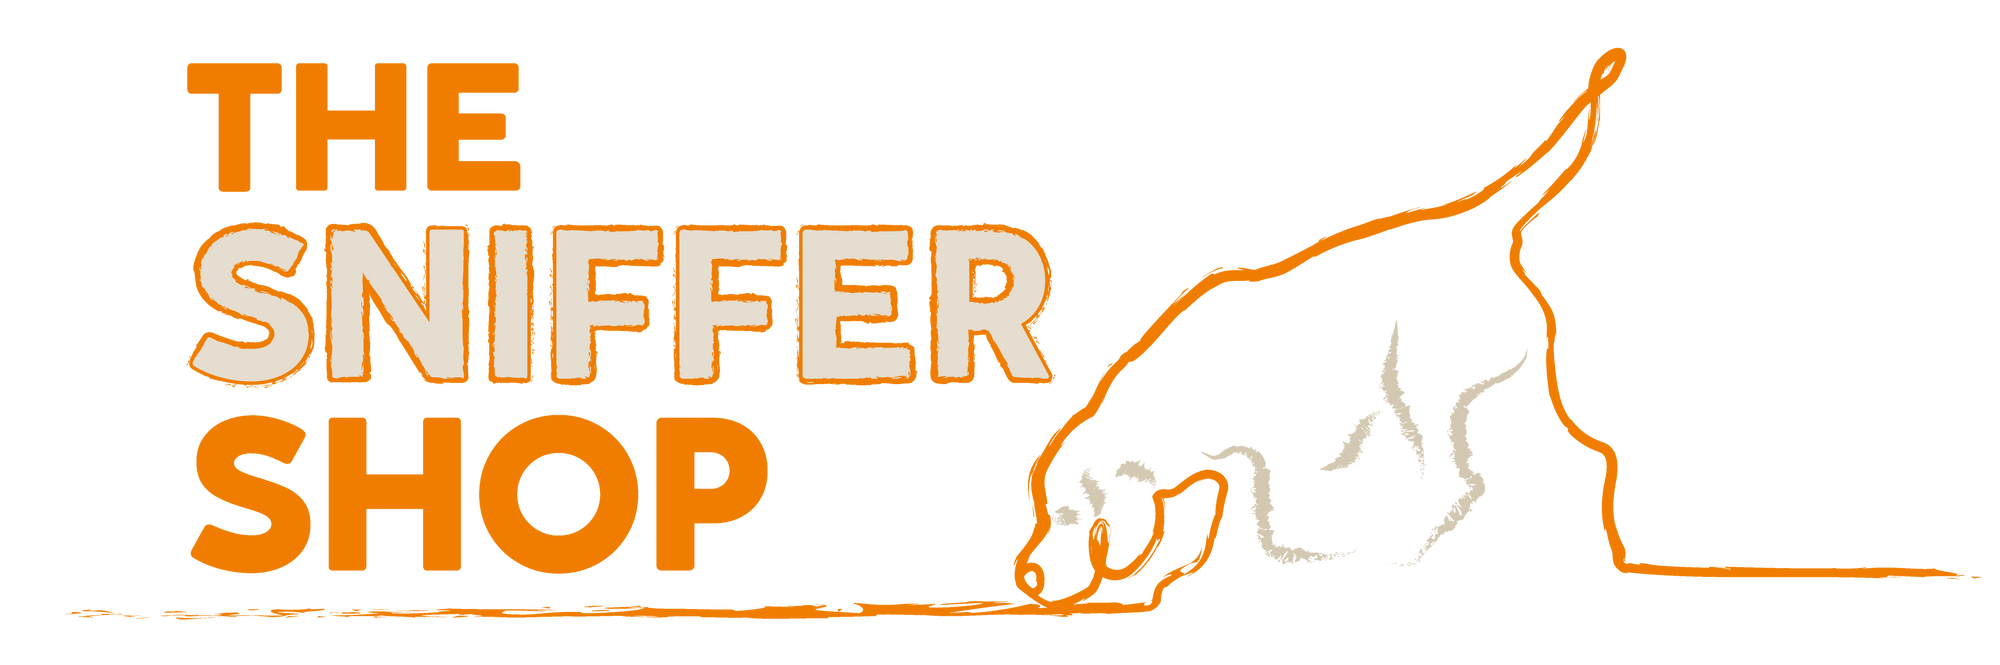 the sniffer shop logo